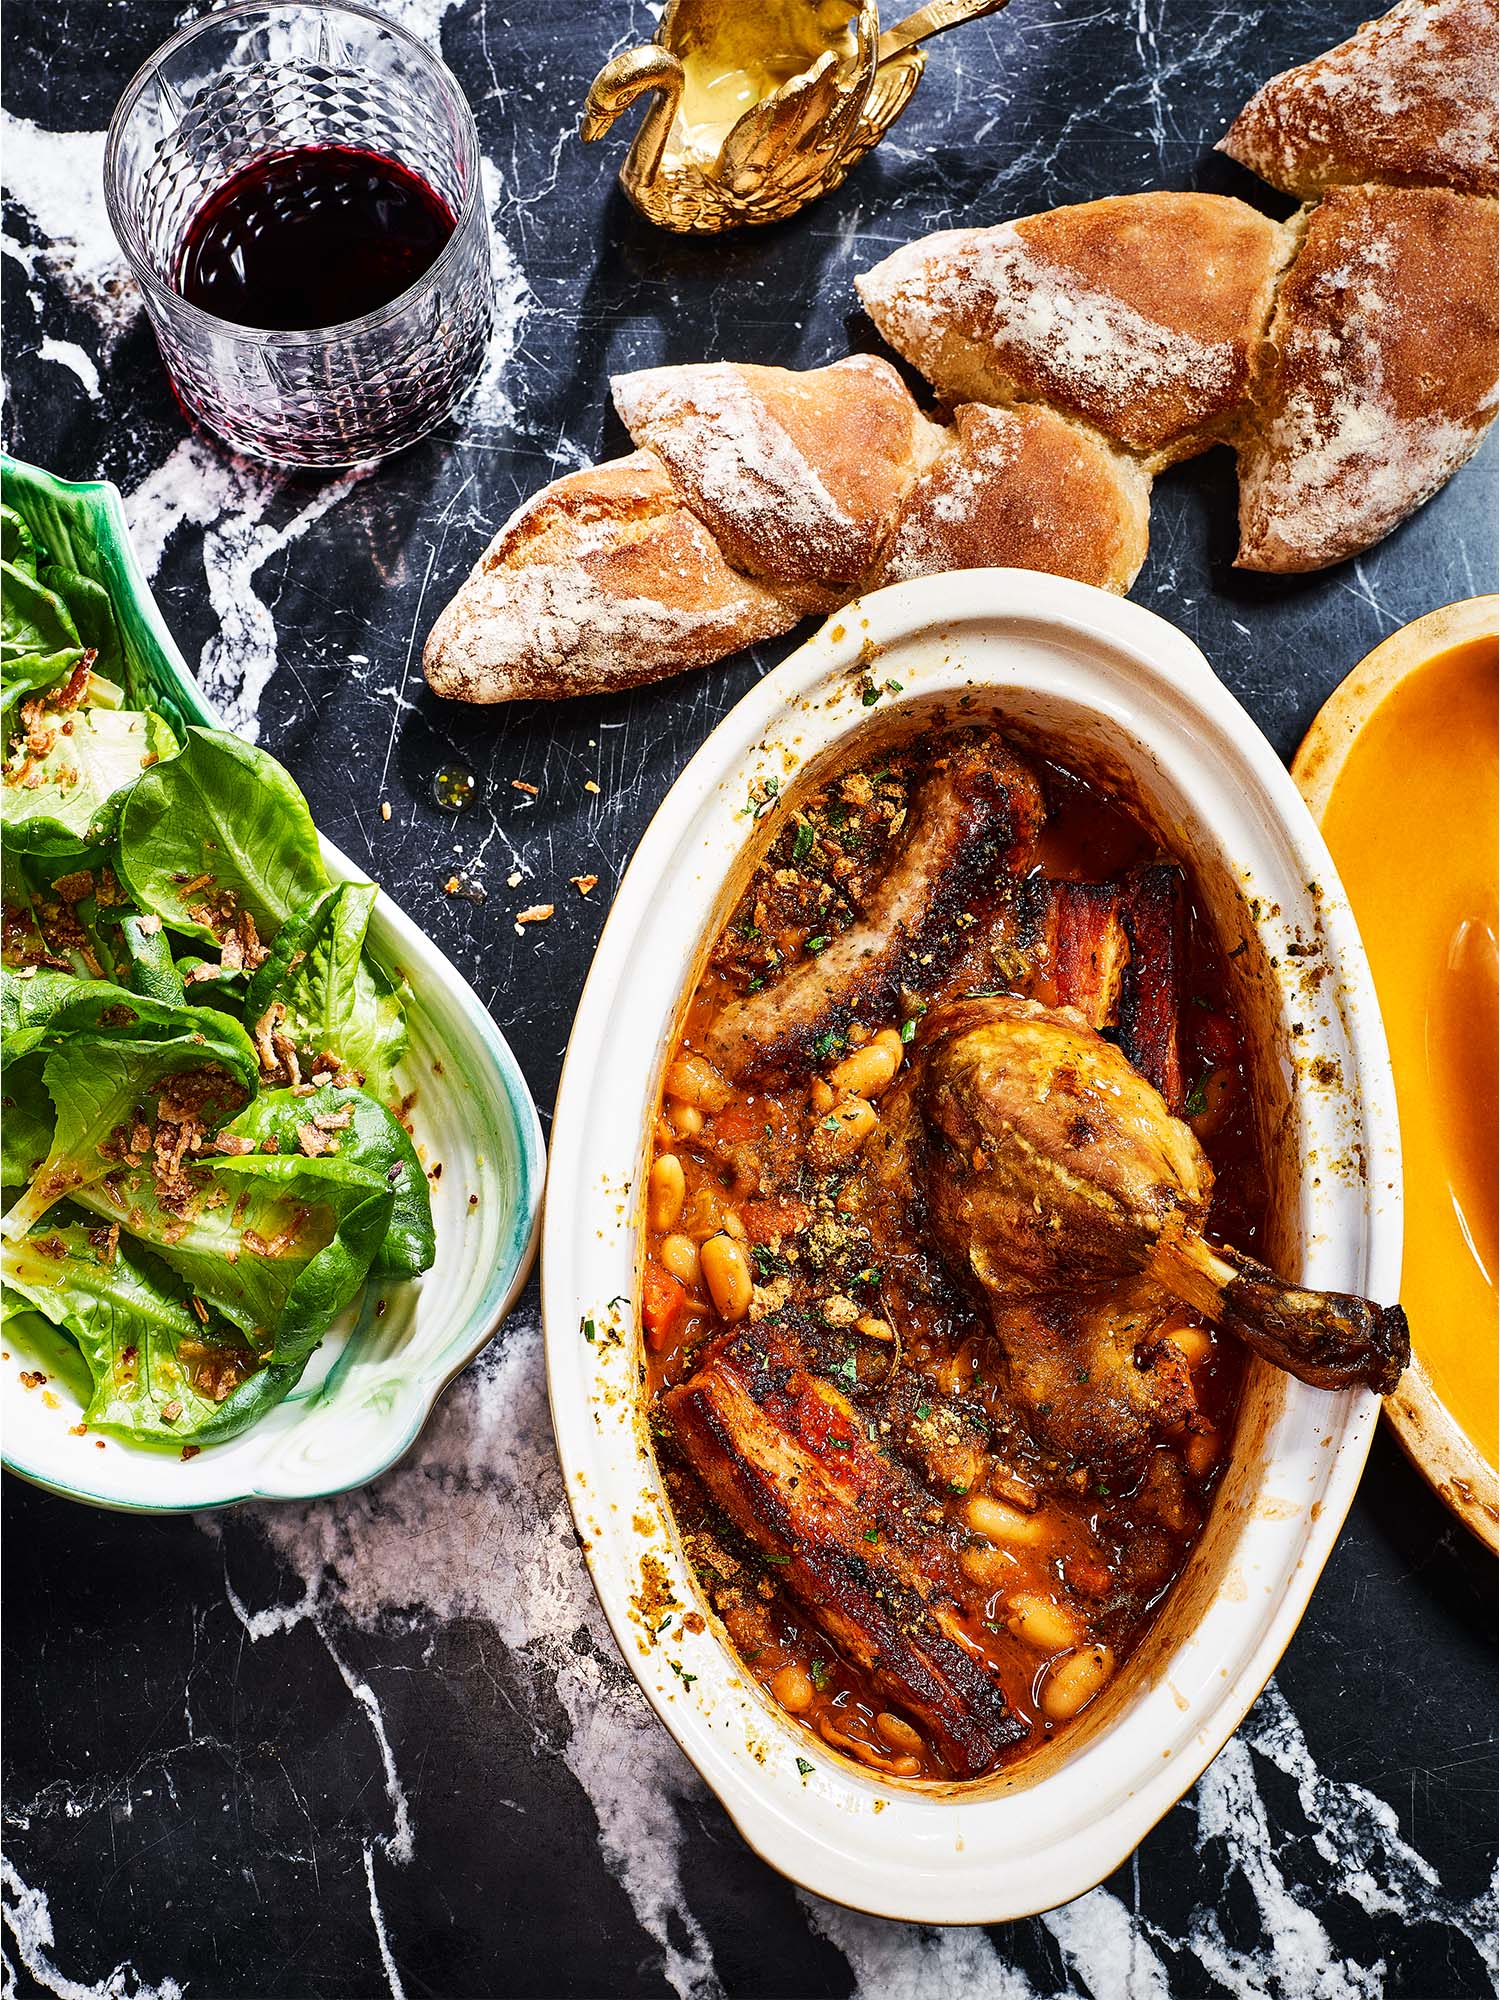 Duck Cassoulet with Braised Pork Belly & Toulouse Sausage - BLACK FRIDAY SALE